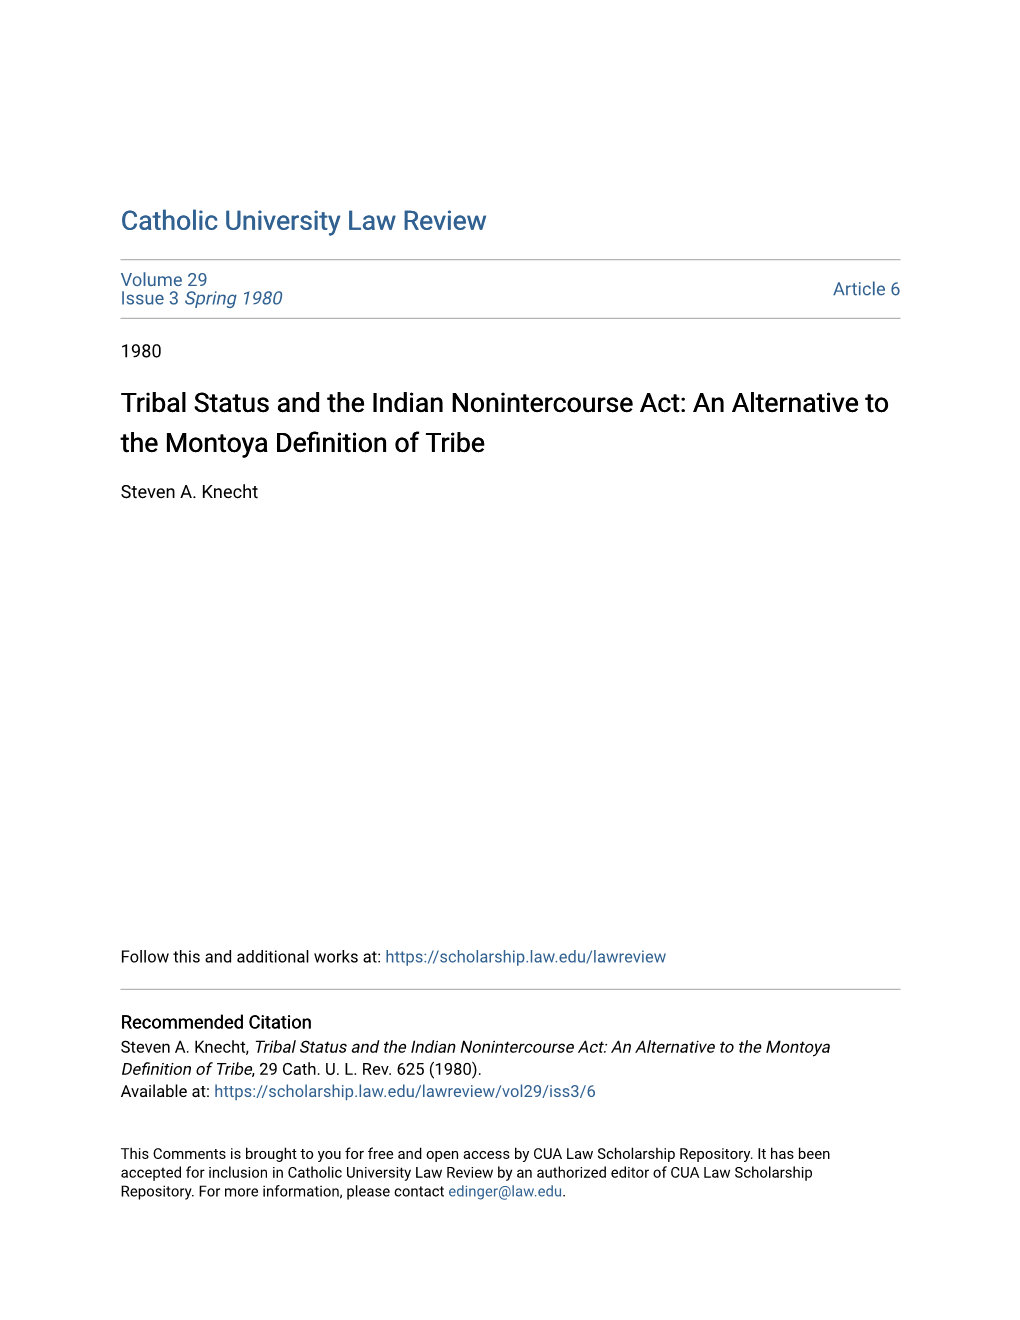 Tribal Status and the Indian Nonintercourse Act: an Alternative to the Montoya Definition of Ribet